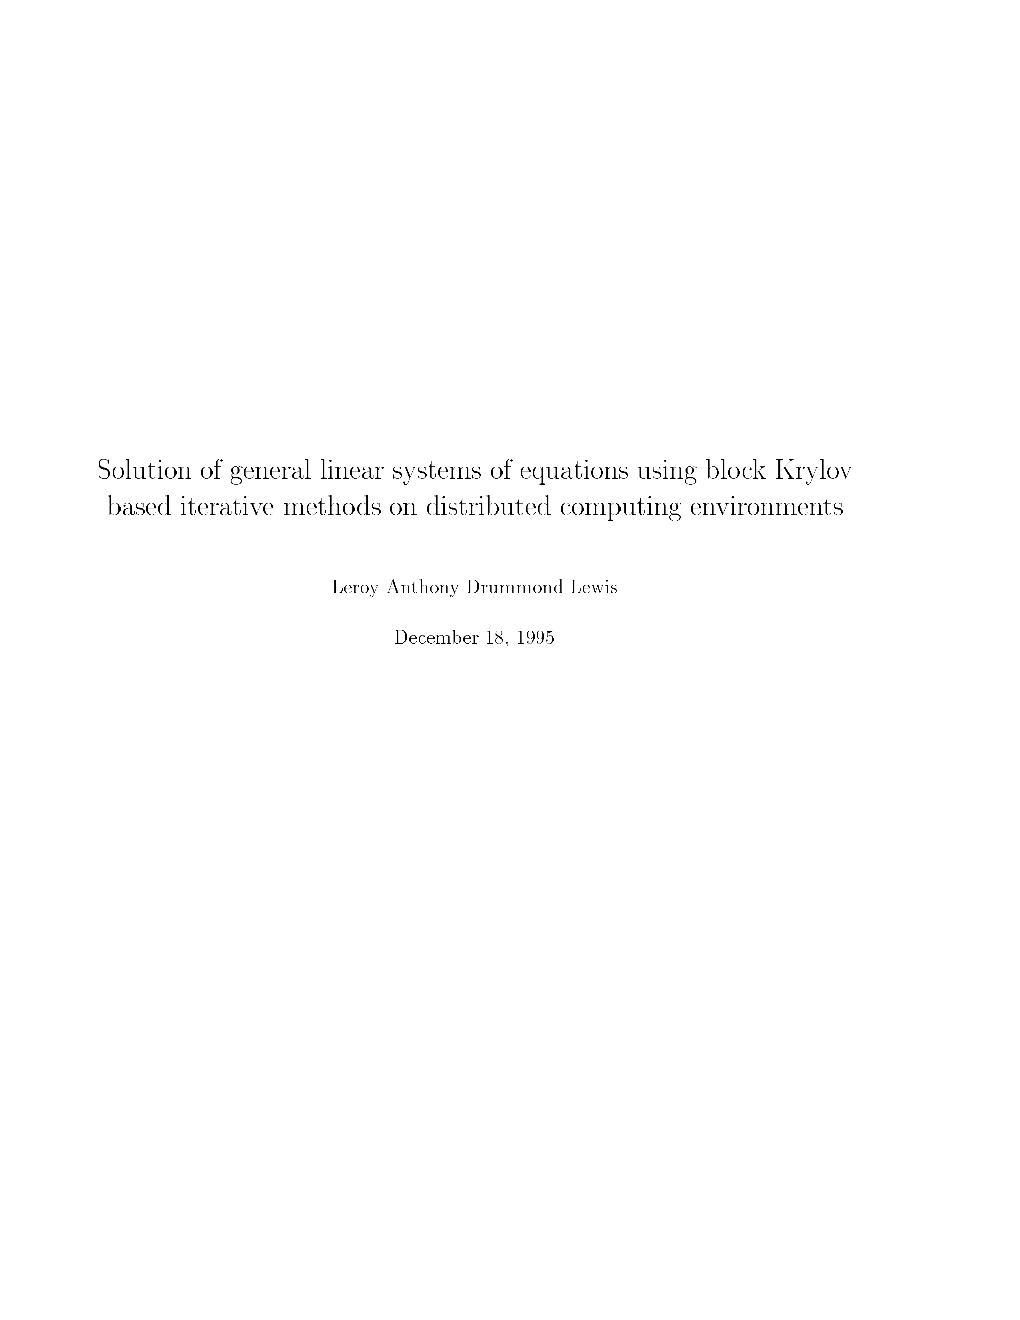 Solution of General Linear Systems of Equations Using Block Krylov Based